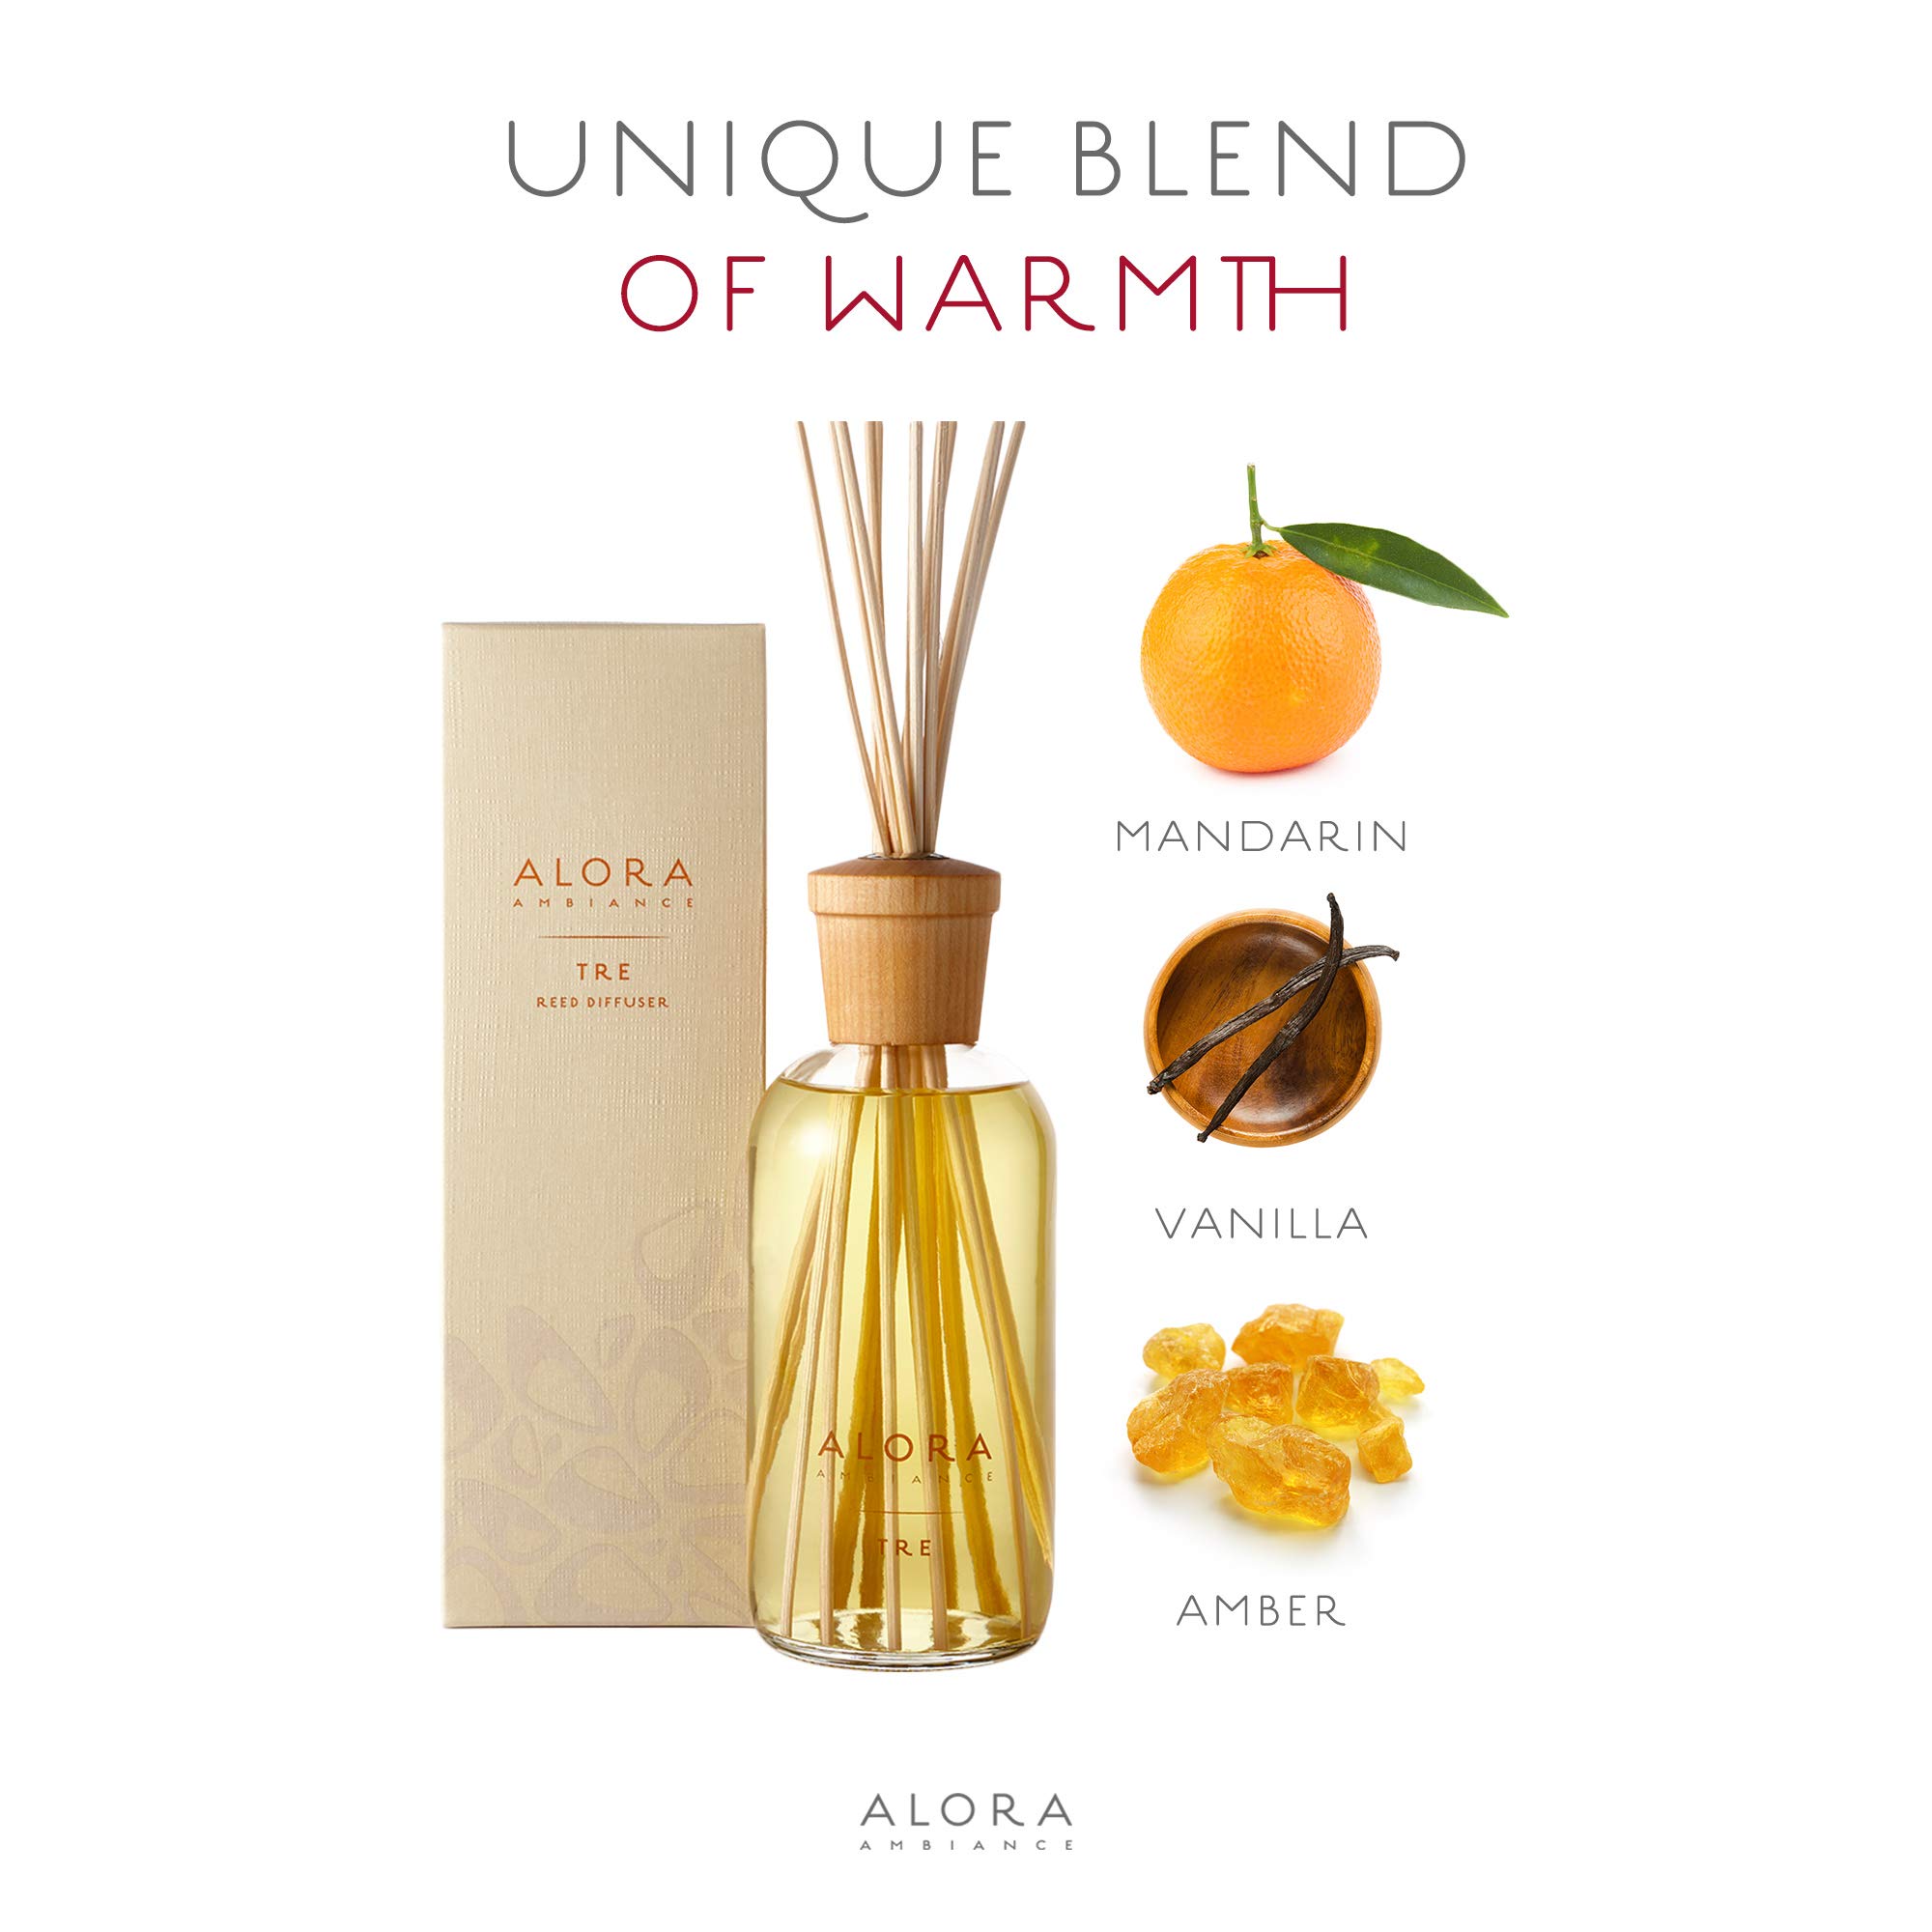 Tre Reed Diffuser 16oz diffuser by Alora Ambiance